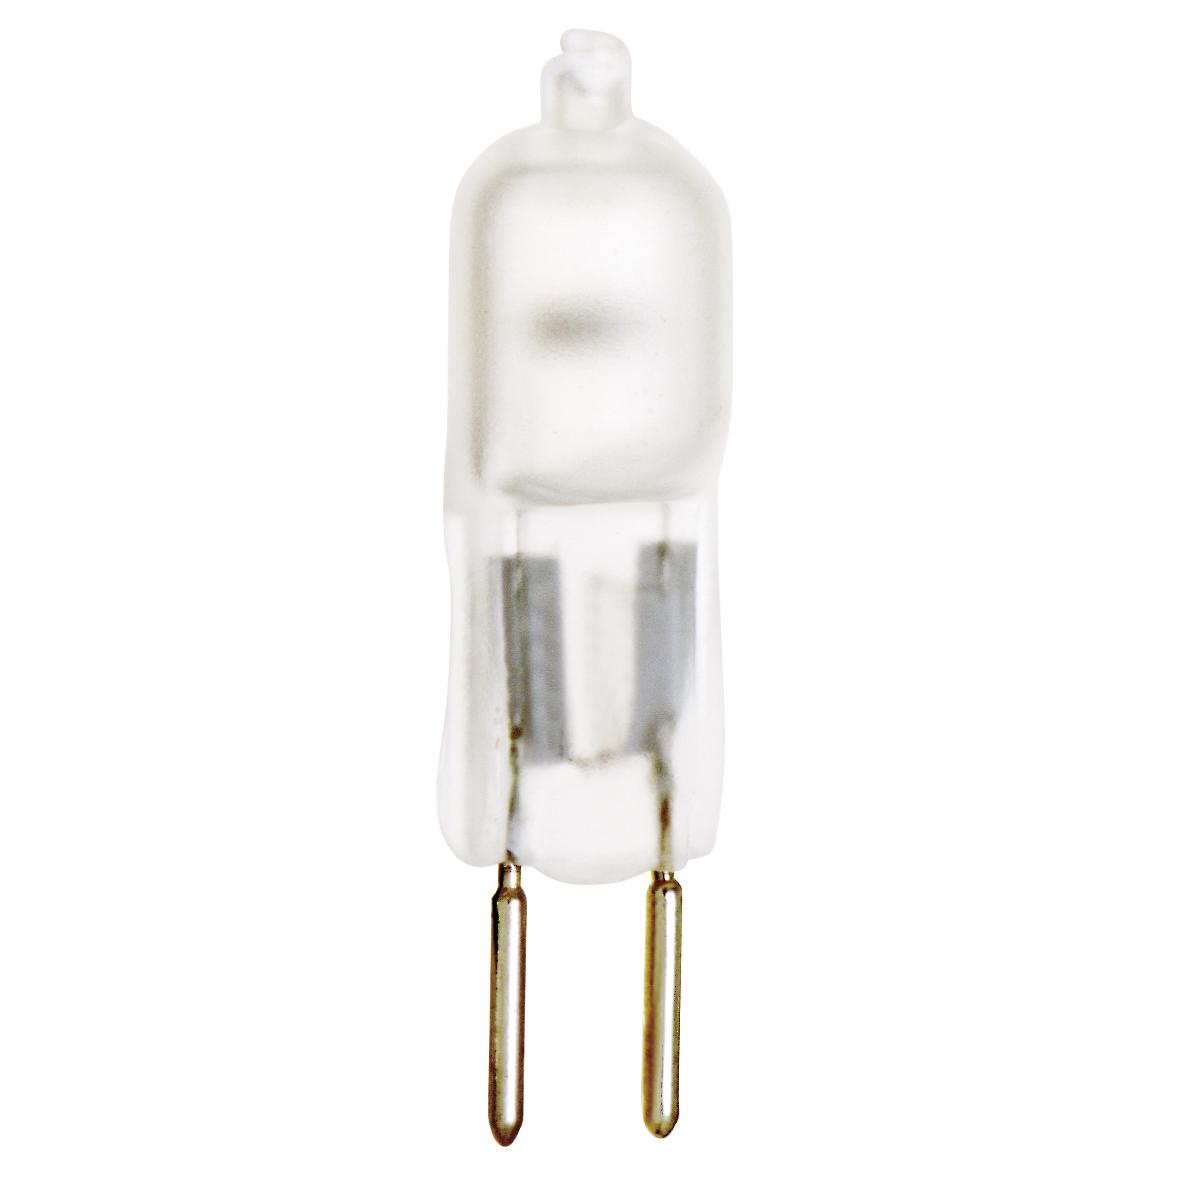 S1912 75W BI PIN FROSTED 12V.